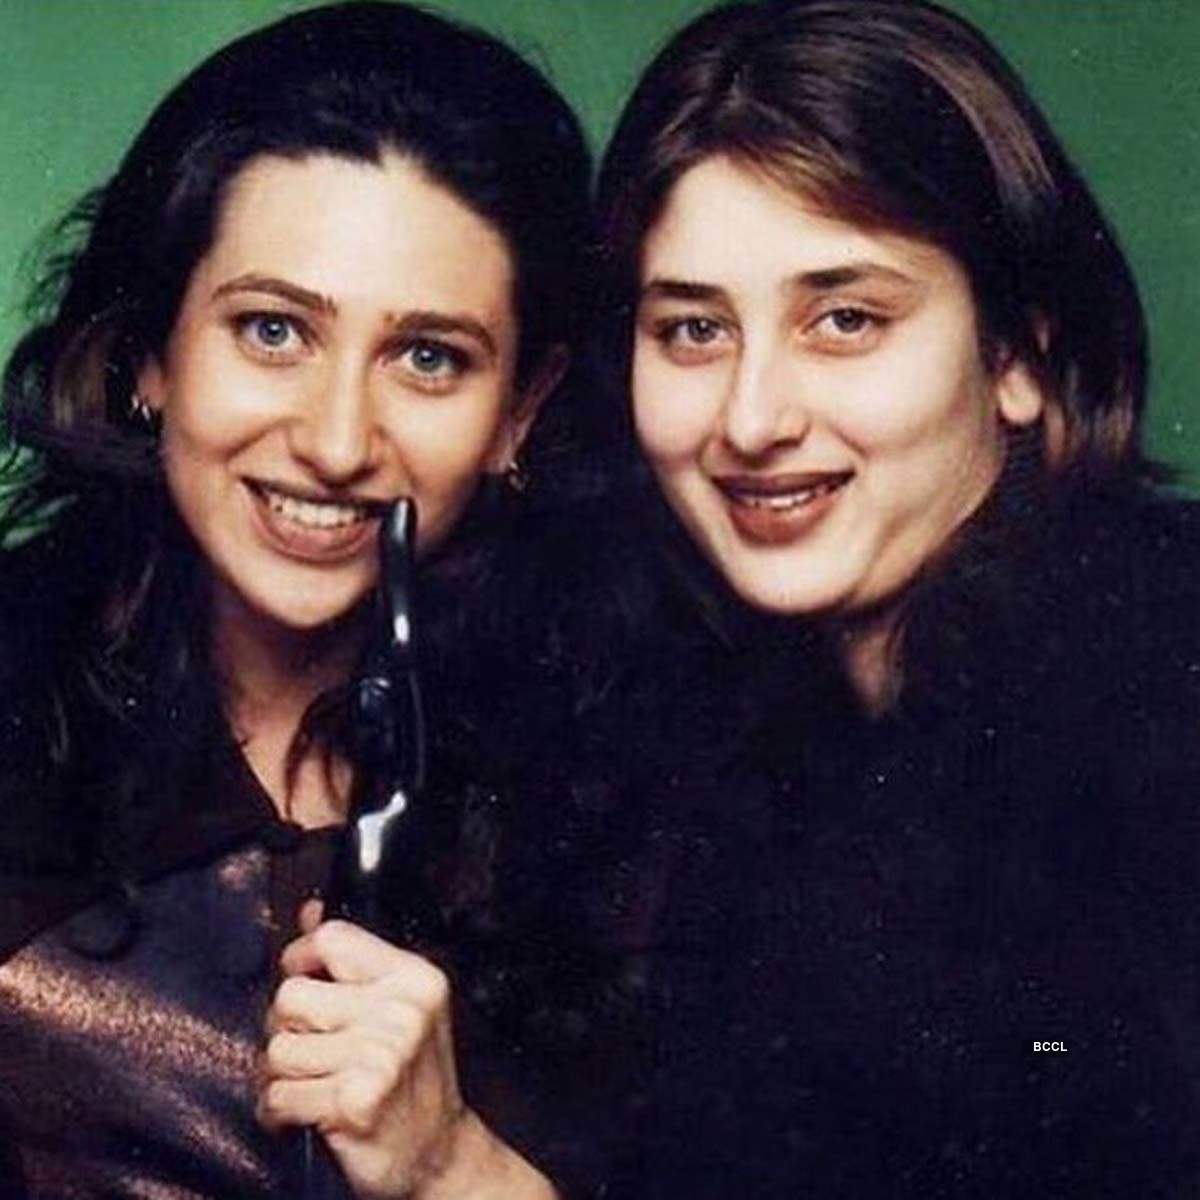 Fans are unable to recognise Kareena Kapoor Khan and Karisma Kapoor in this throwback pic